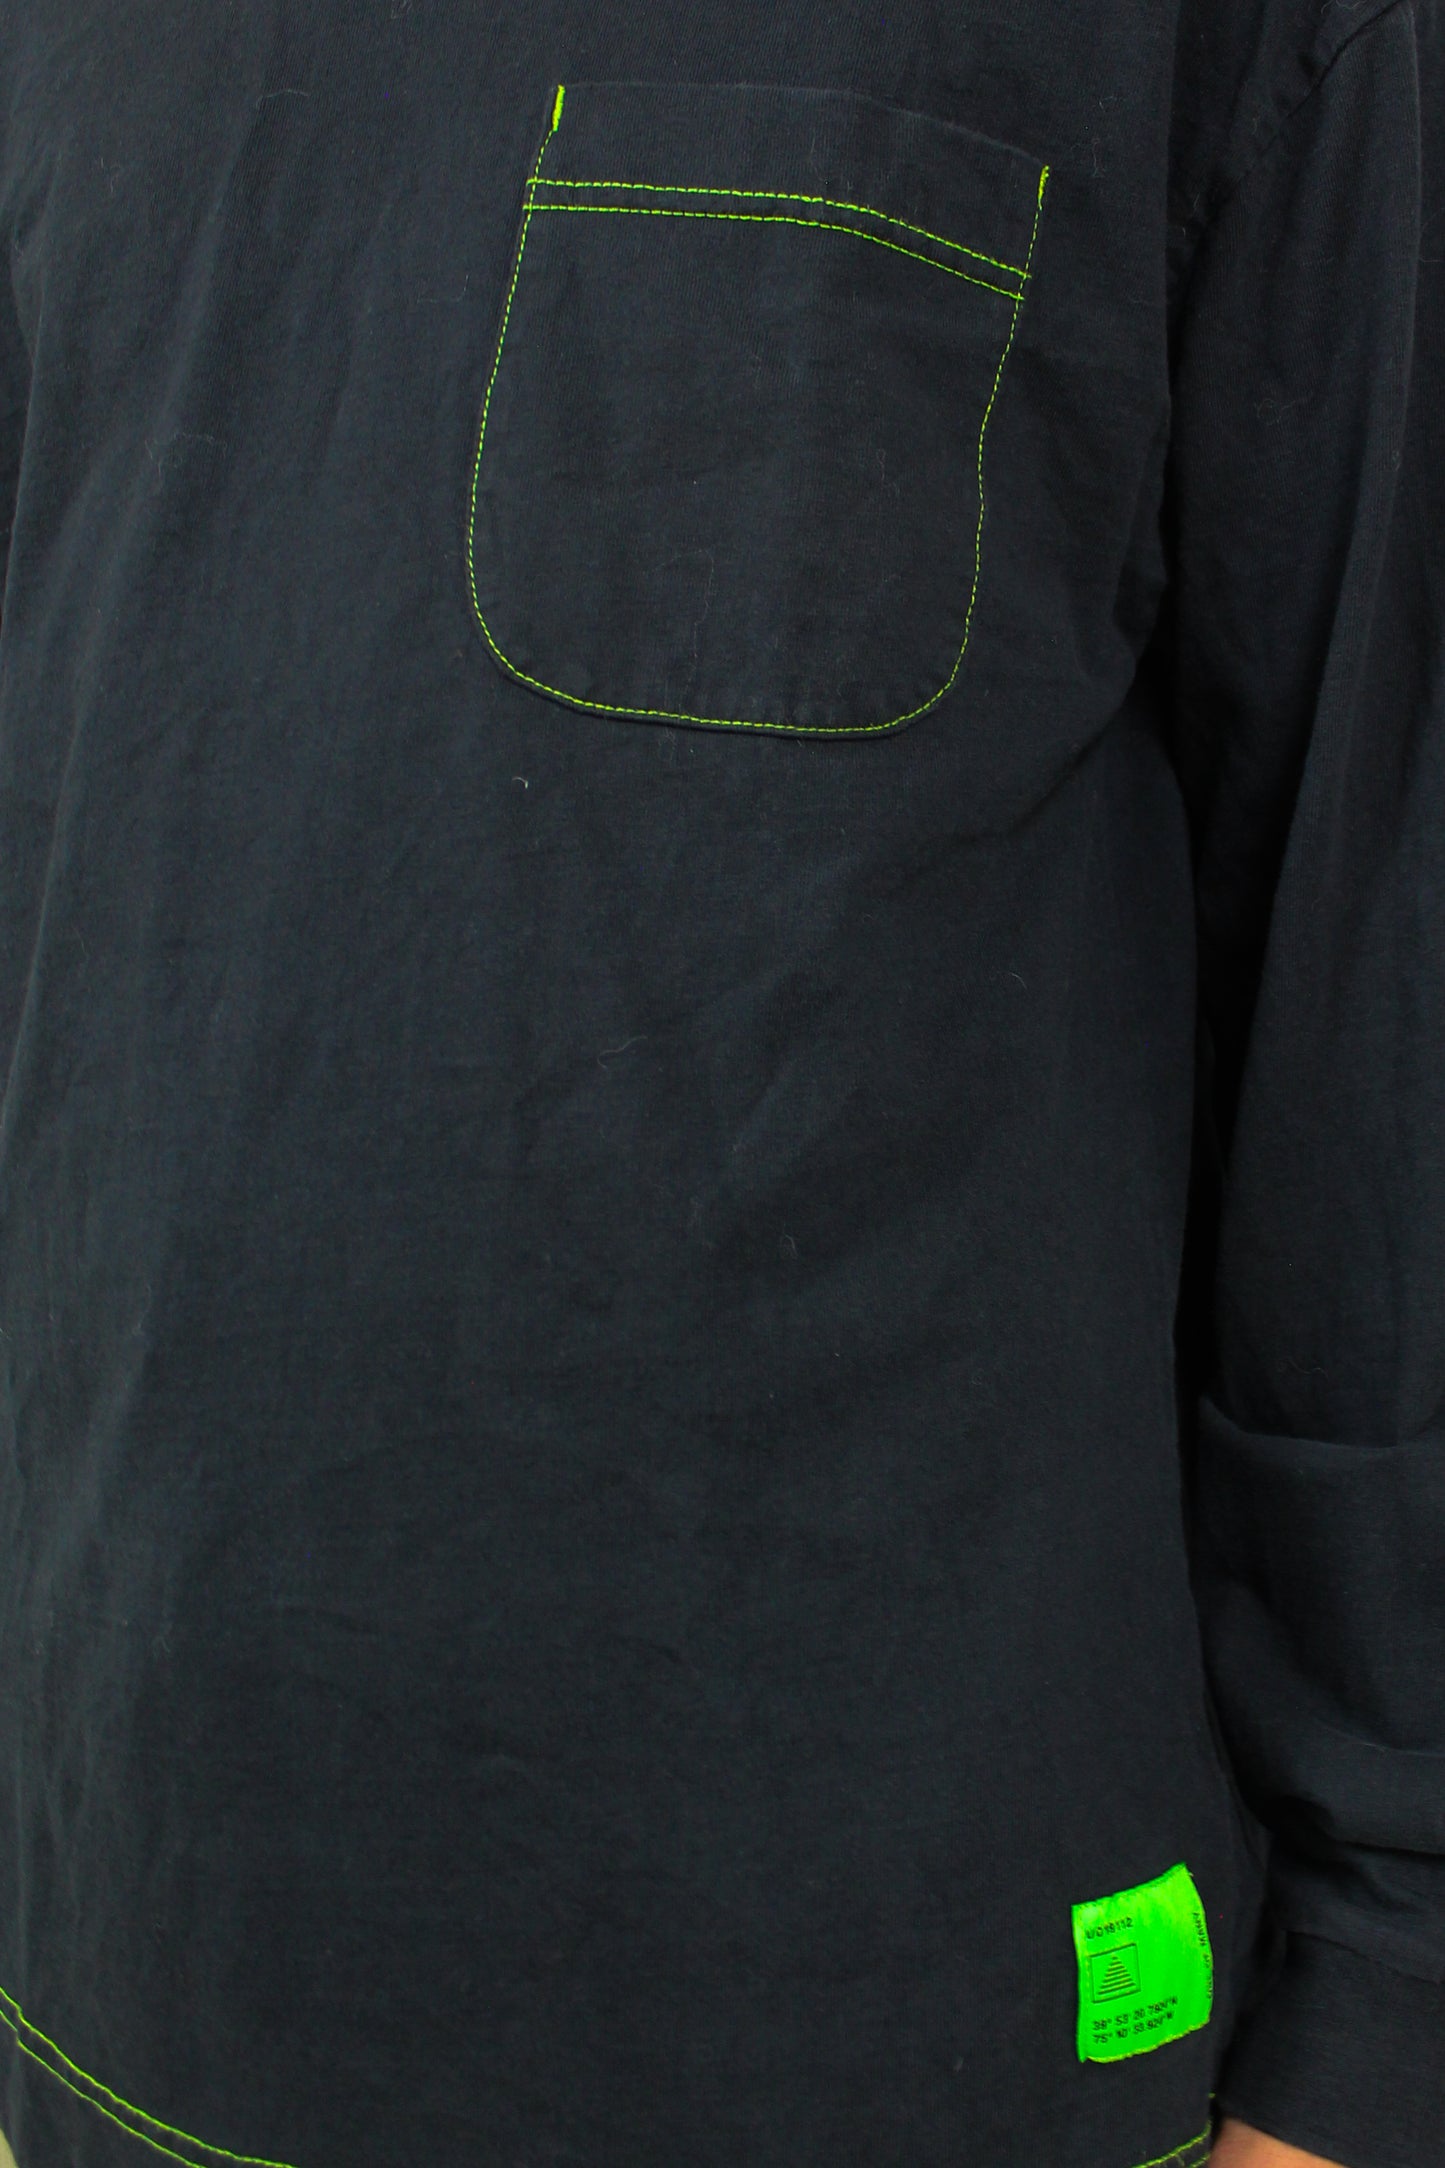 Black Long Sleeve with Green Stitching